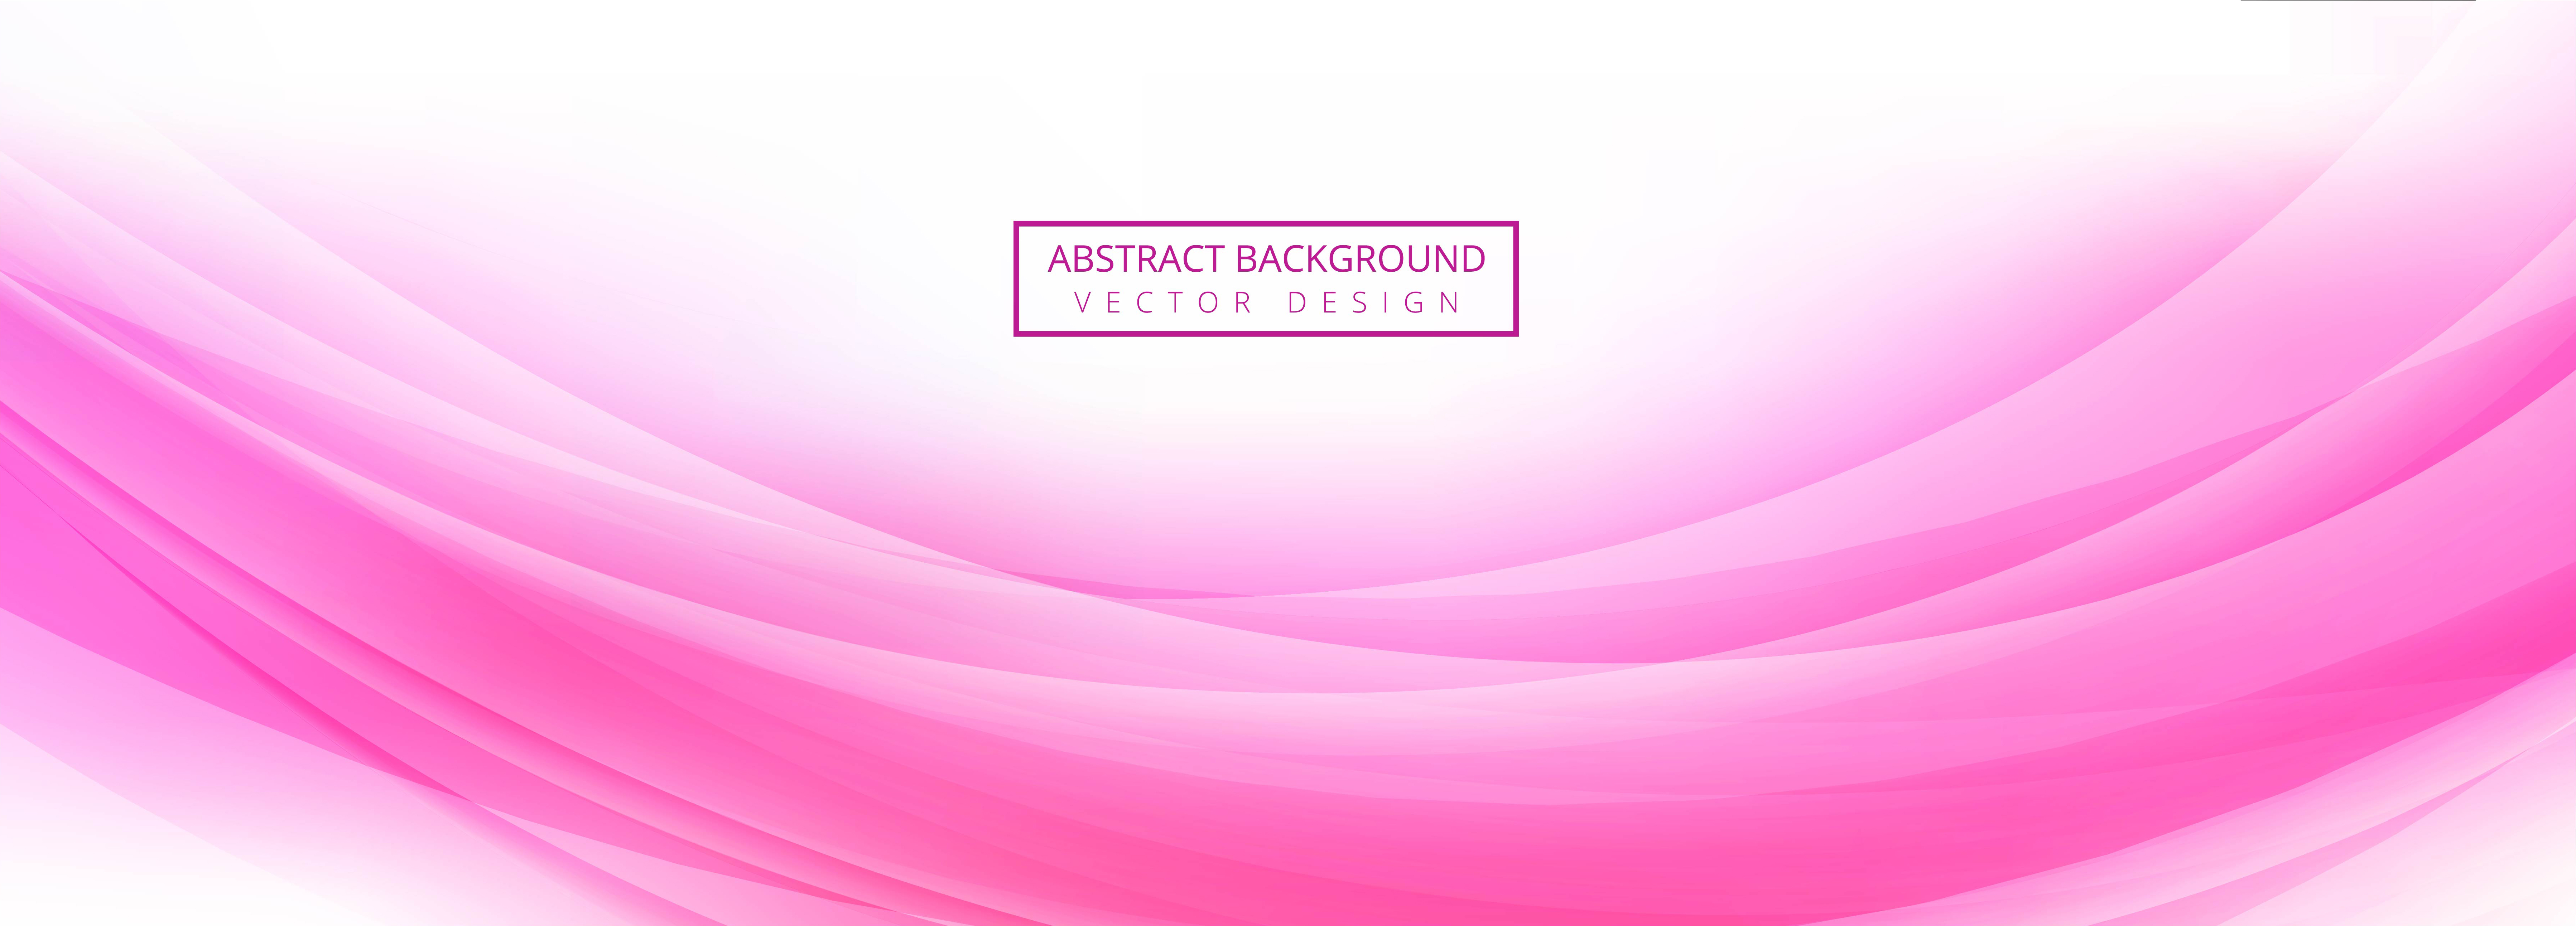 Abstract pink  wave banner  template  vector Download Free 